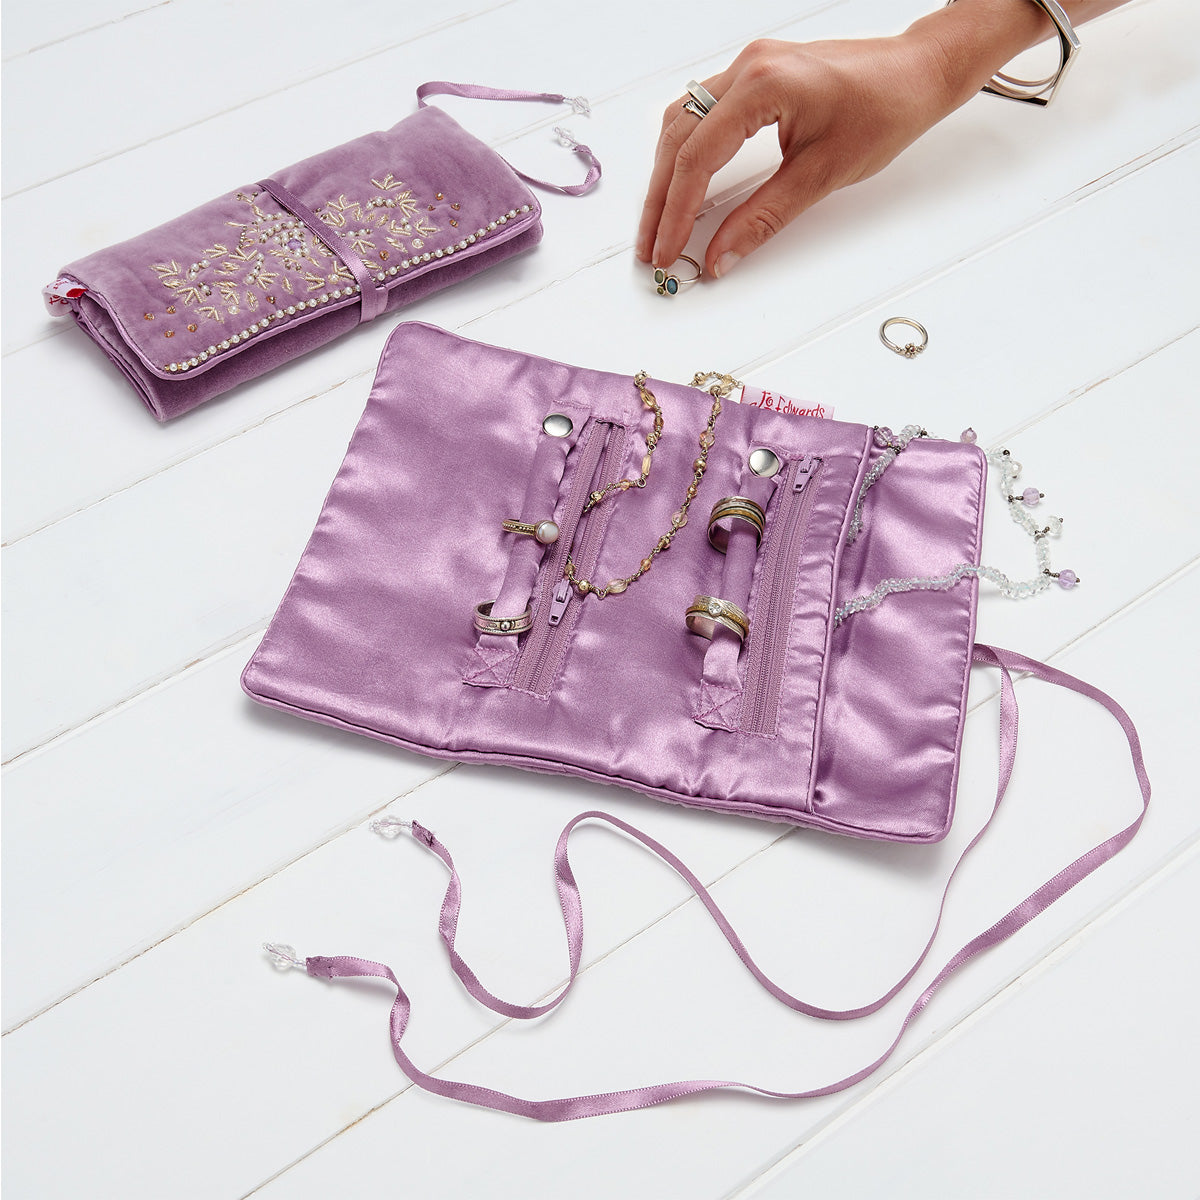 Lilac Velvet Jewellery Roll With Gold Embroidery & Satin Lining